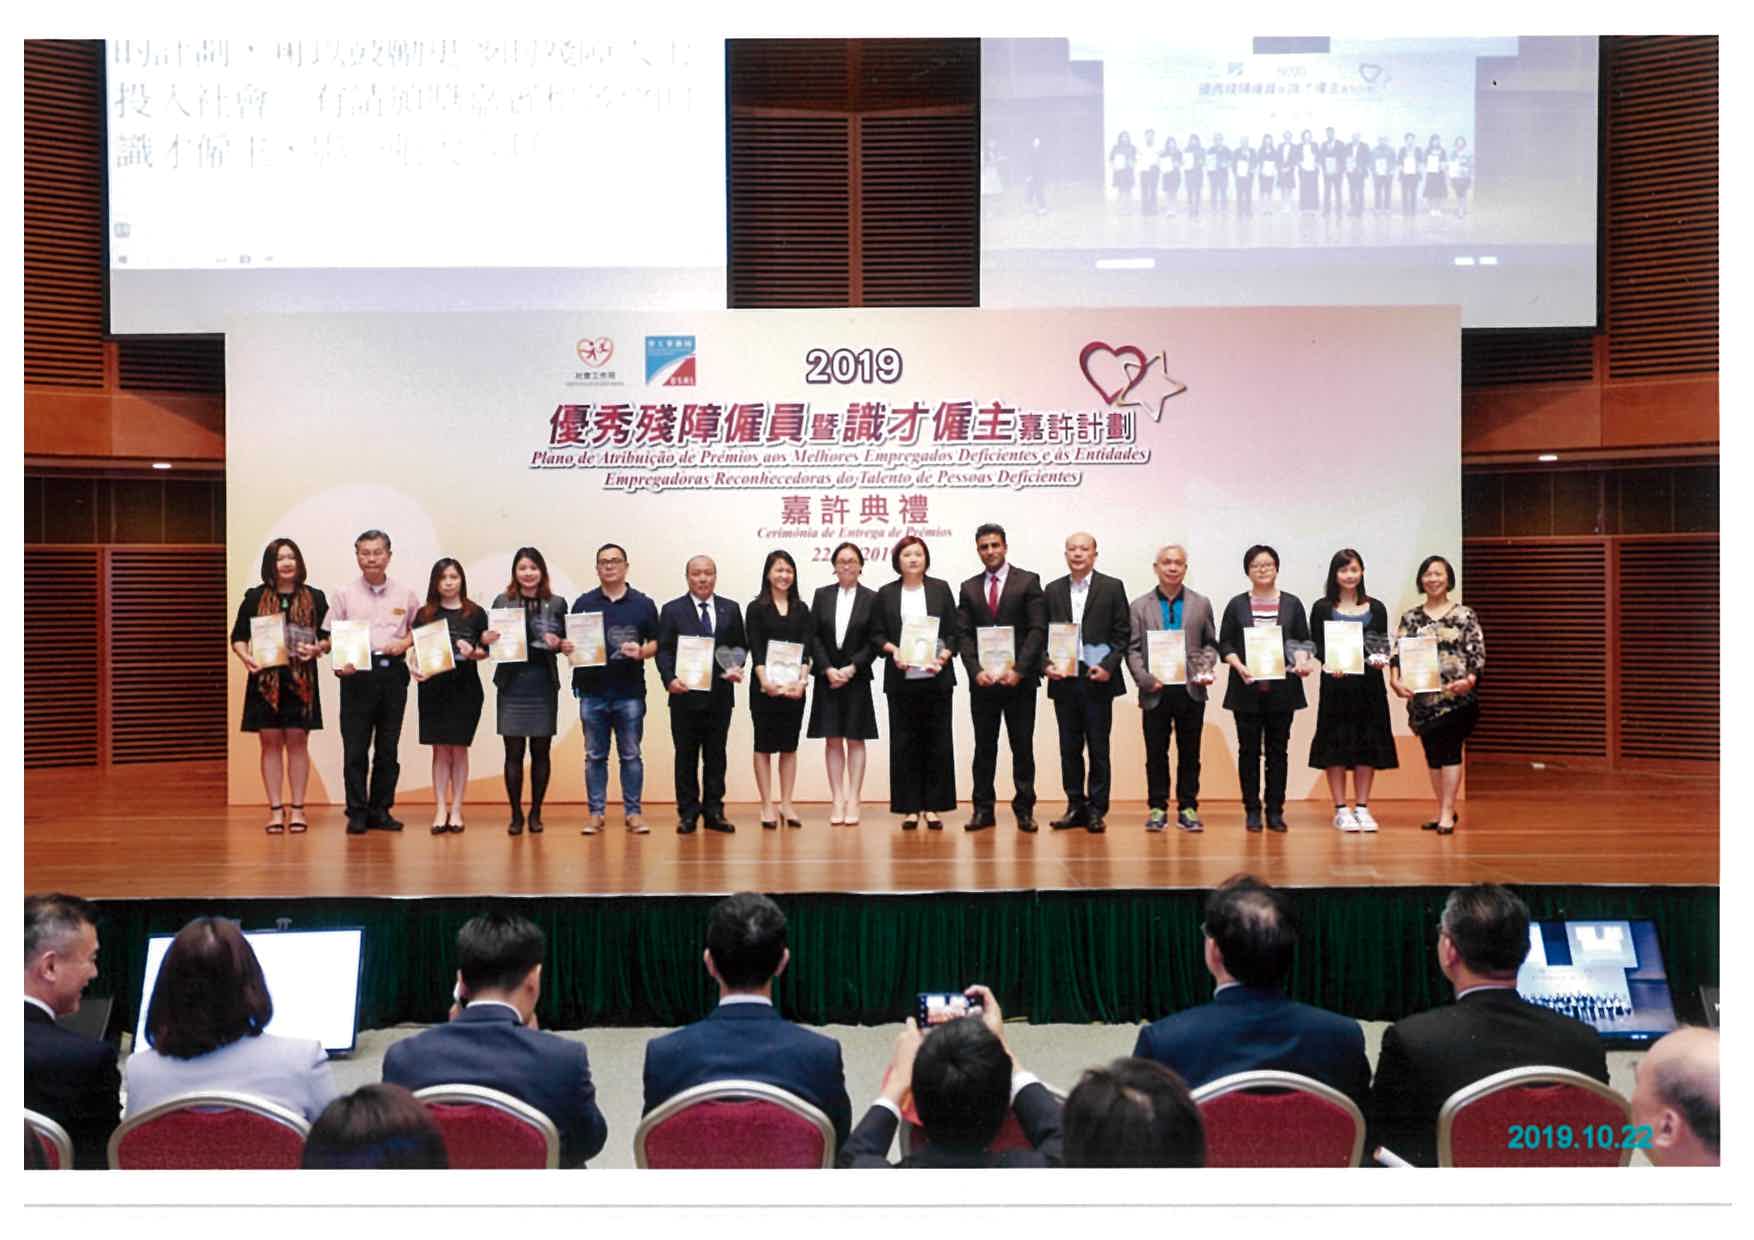 CESL Asia receives a Talent Recognizing Employers Award by IAS and DSAL